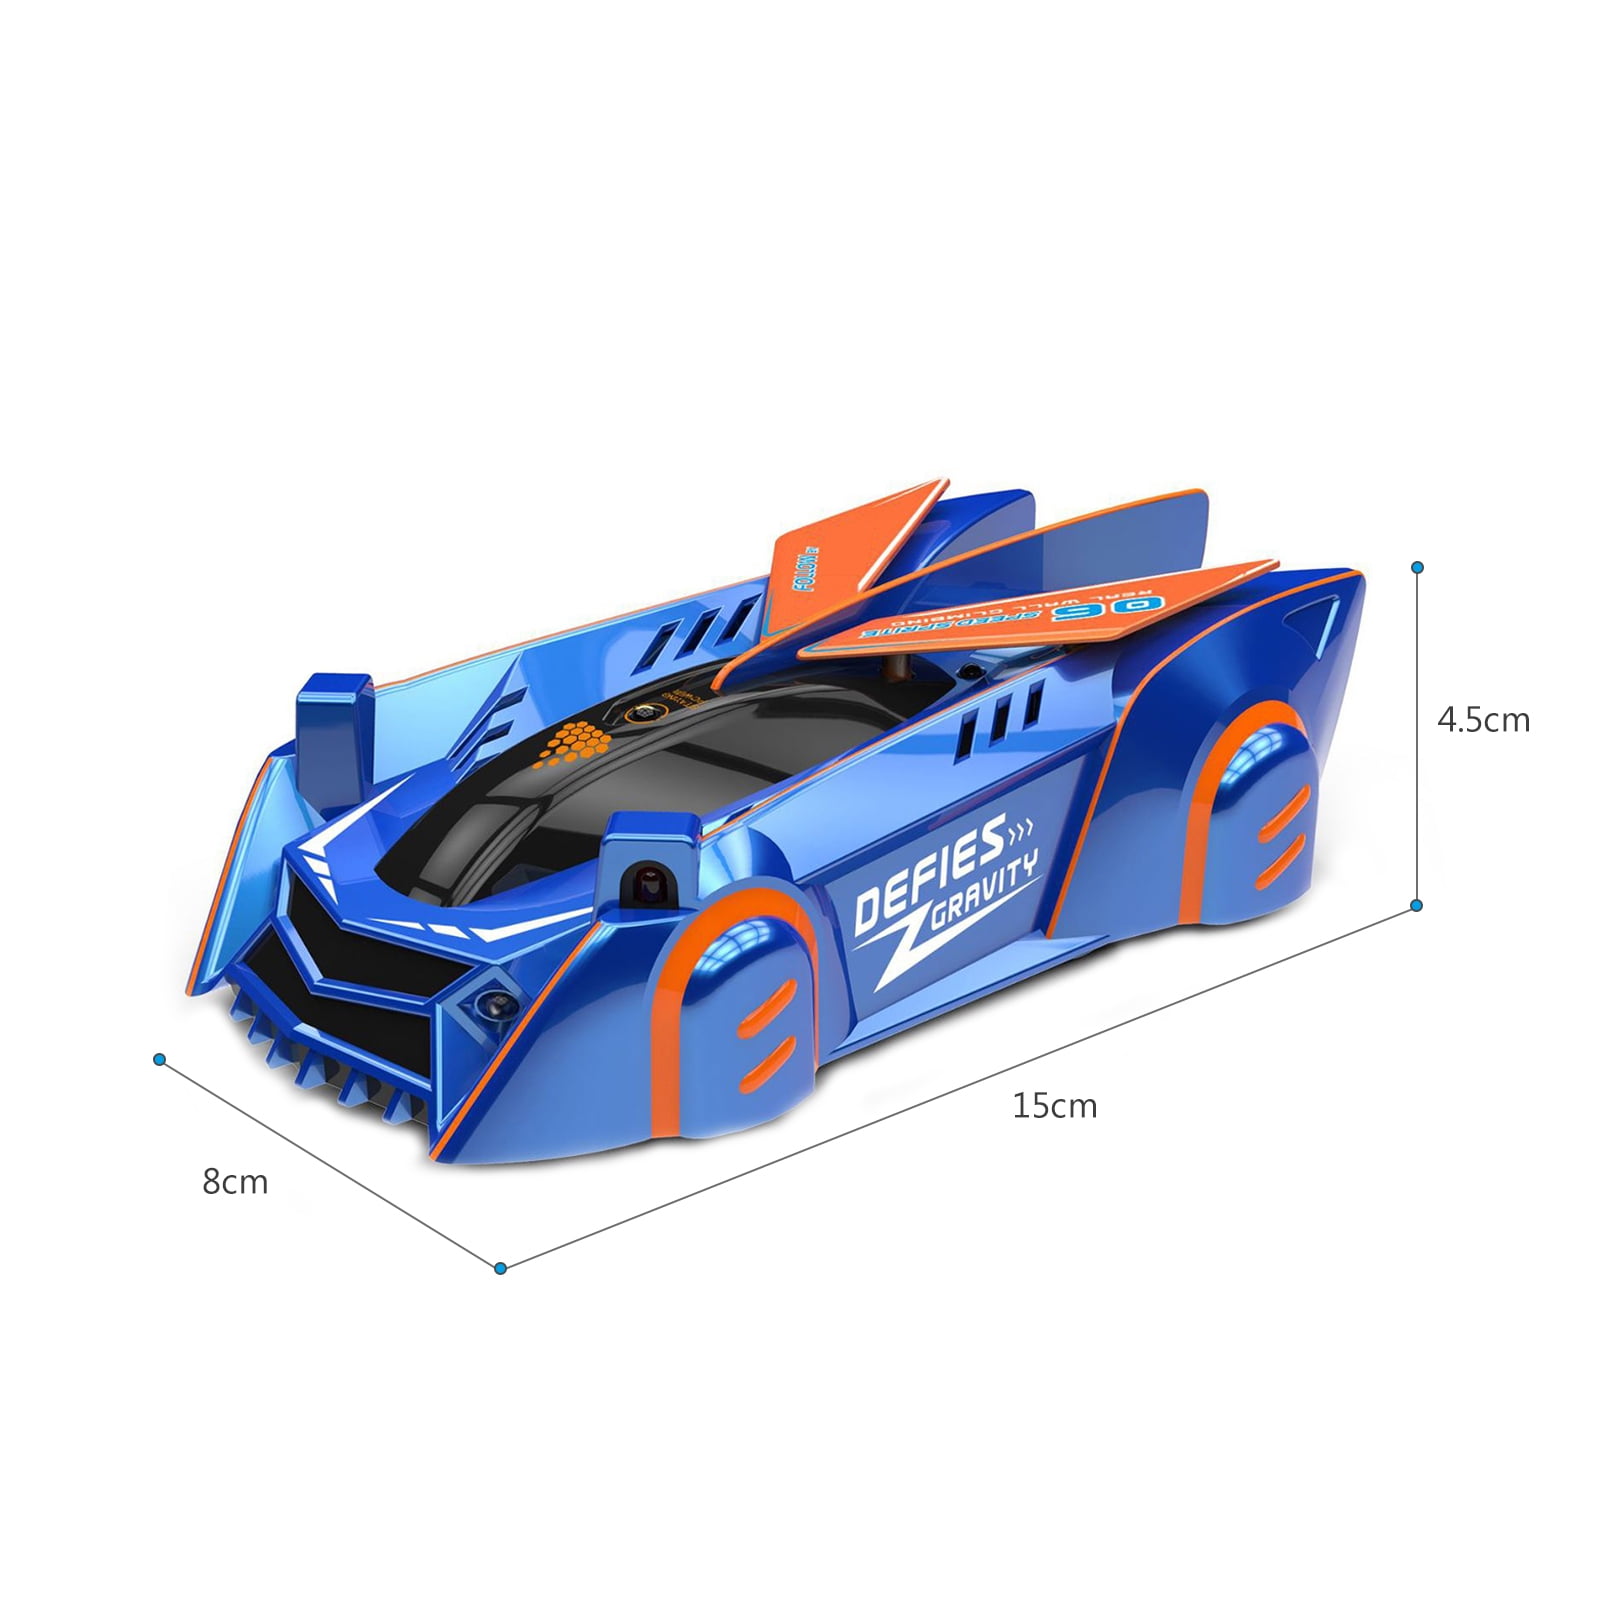 Dcenta RC Climbing Car for Kids Remote Control Car Dual Modes Infrared Ray Guided Race Car Rechargeable Mini Toy Vehicles with Lights Gifts for Boys Girls